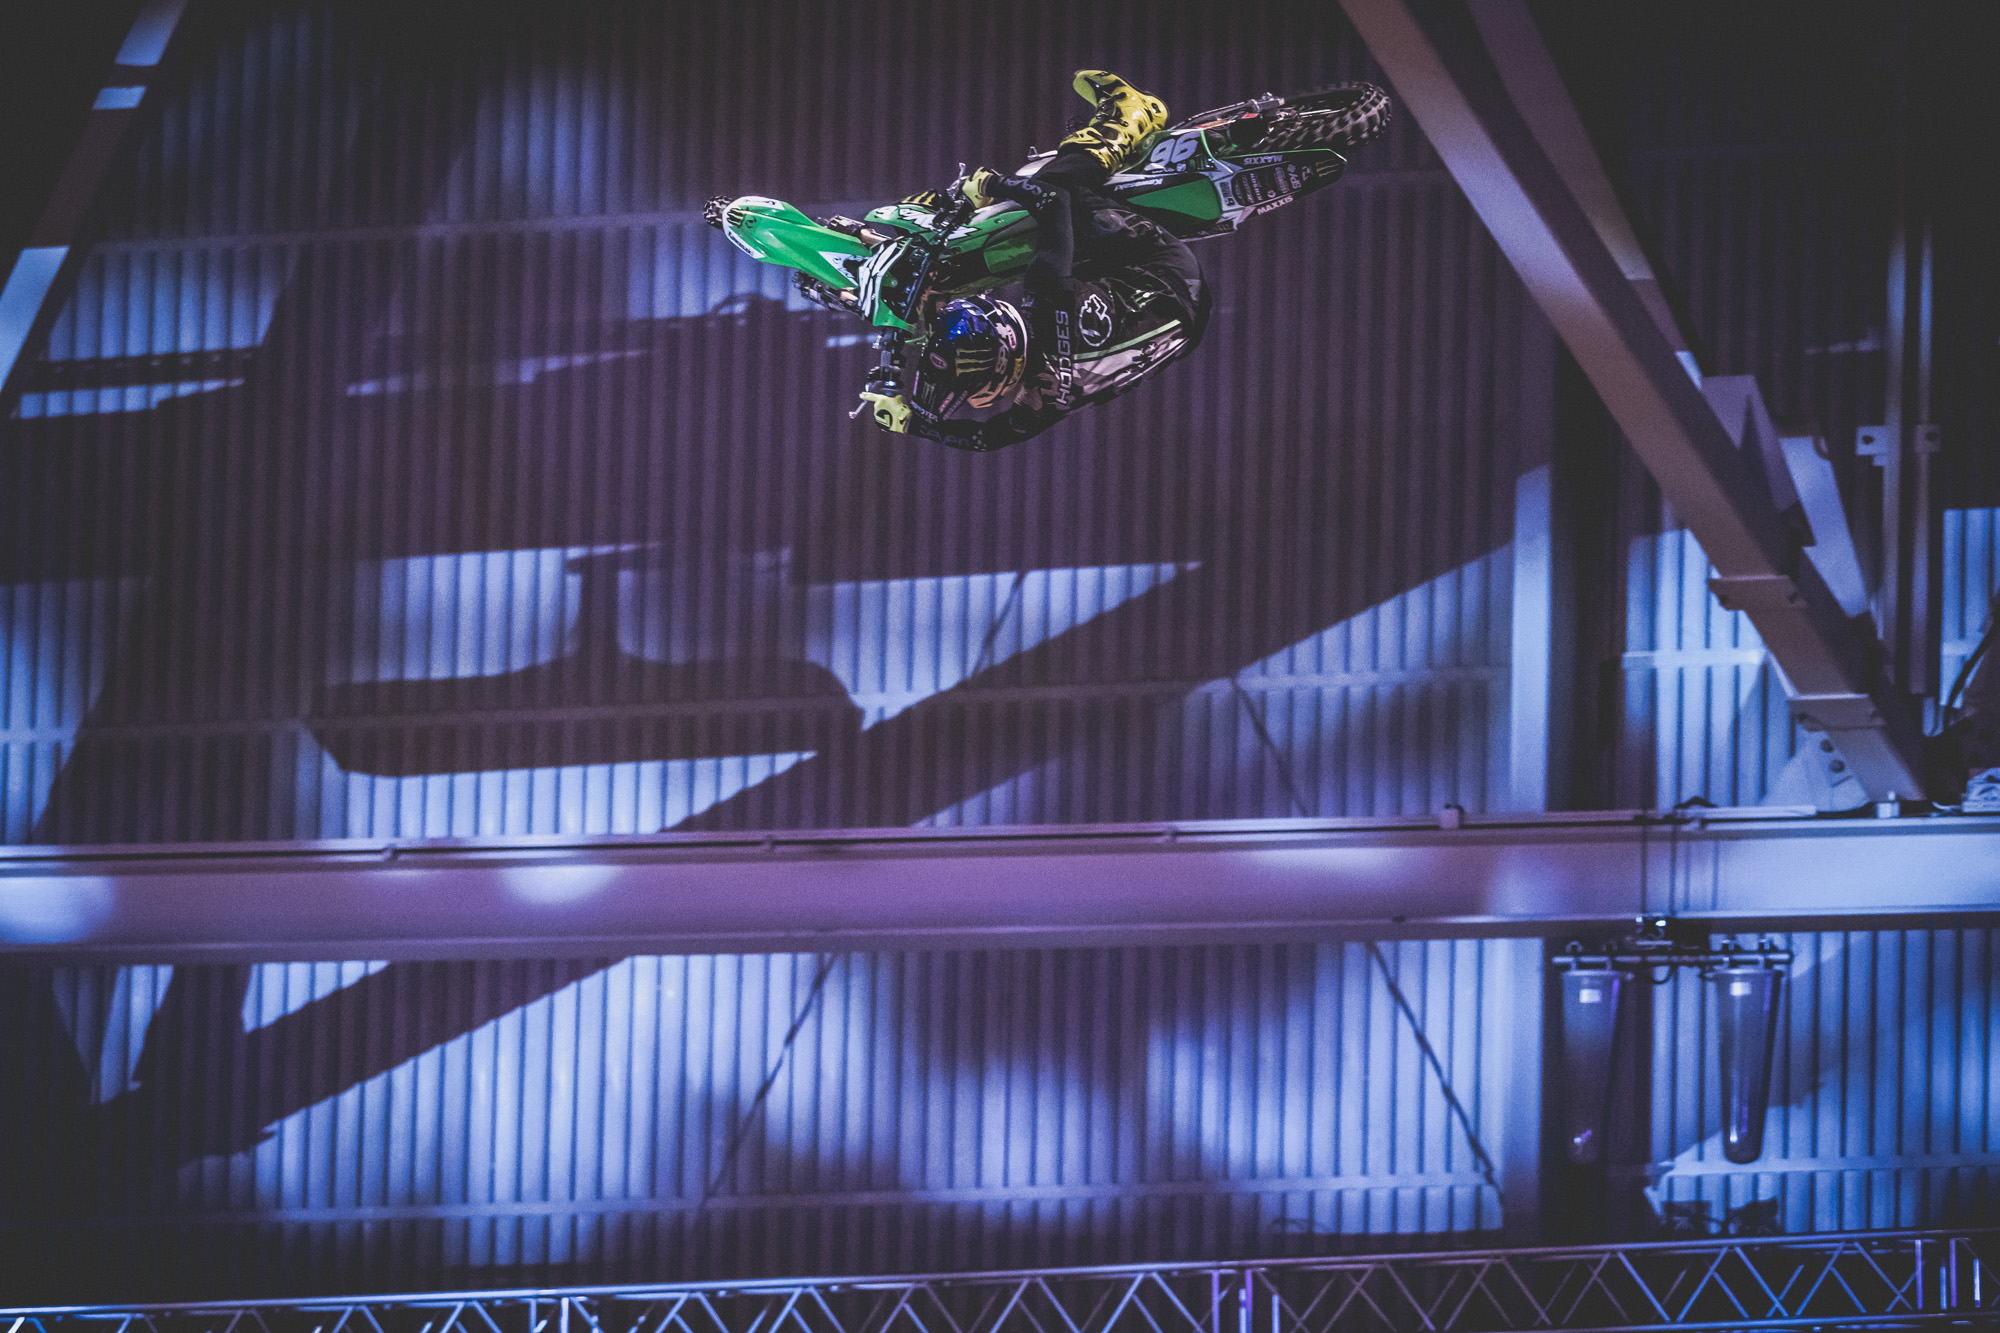 Monster Energy's Axell Hodges Takes Silver in Moto X QuarterPipe High at X Games Noway 2019